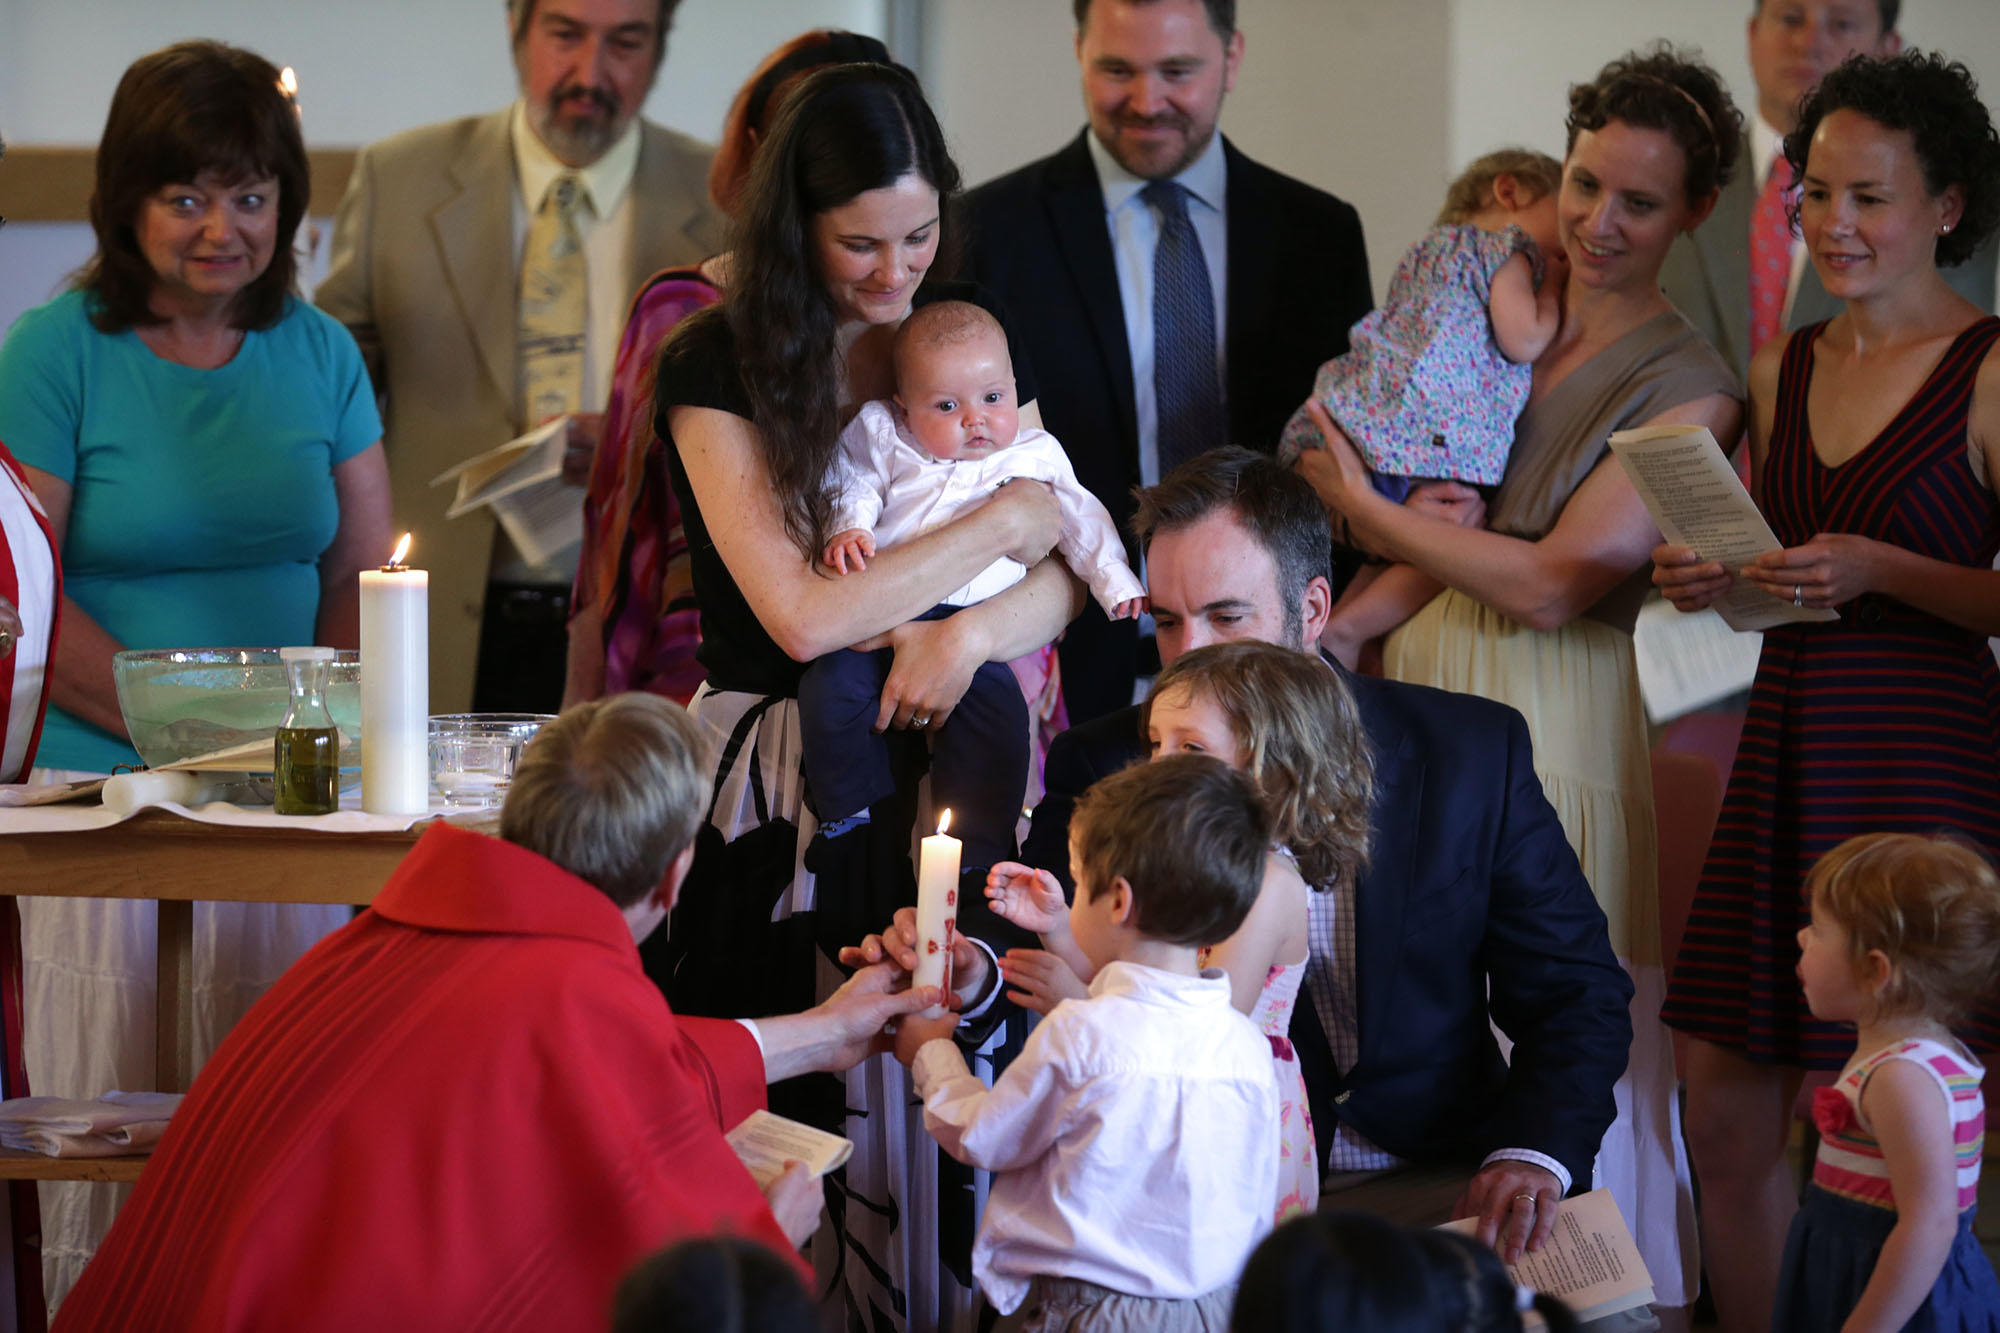 DC widow blog writer Marjorie Brimley and family at children's baptisms